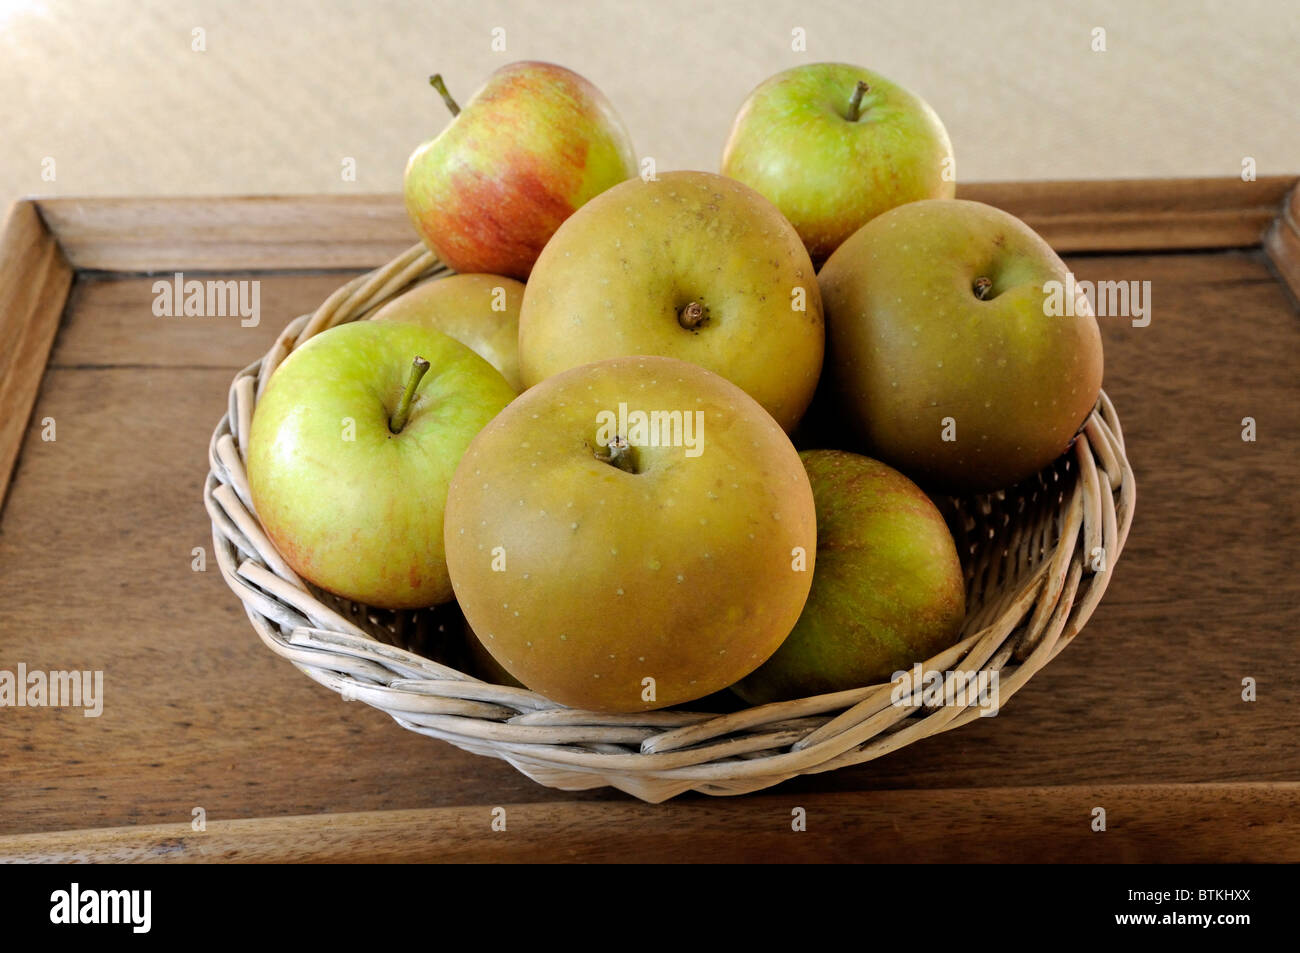 Basket of Egremont Russet and Cox apples on old wooden tray Stock Photo